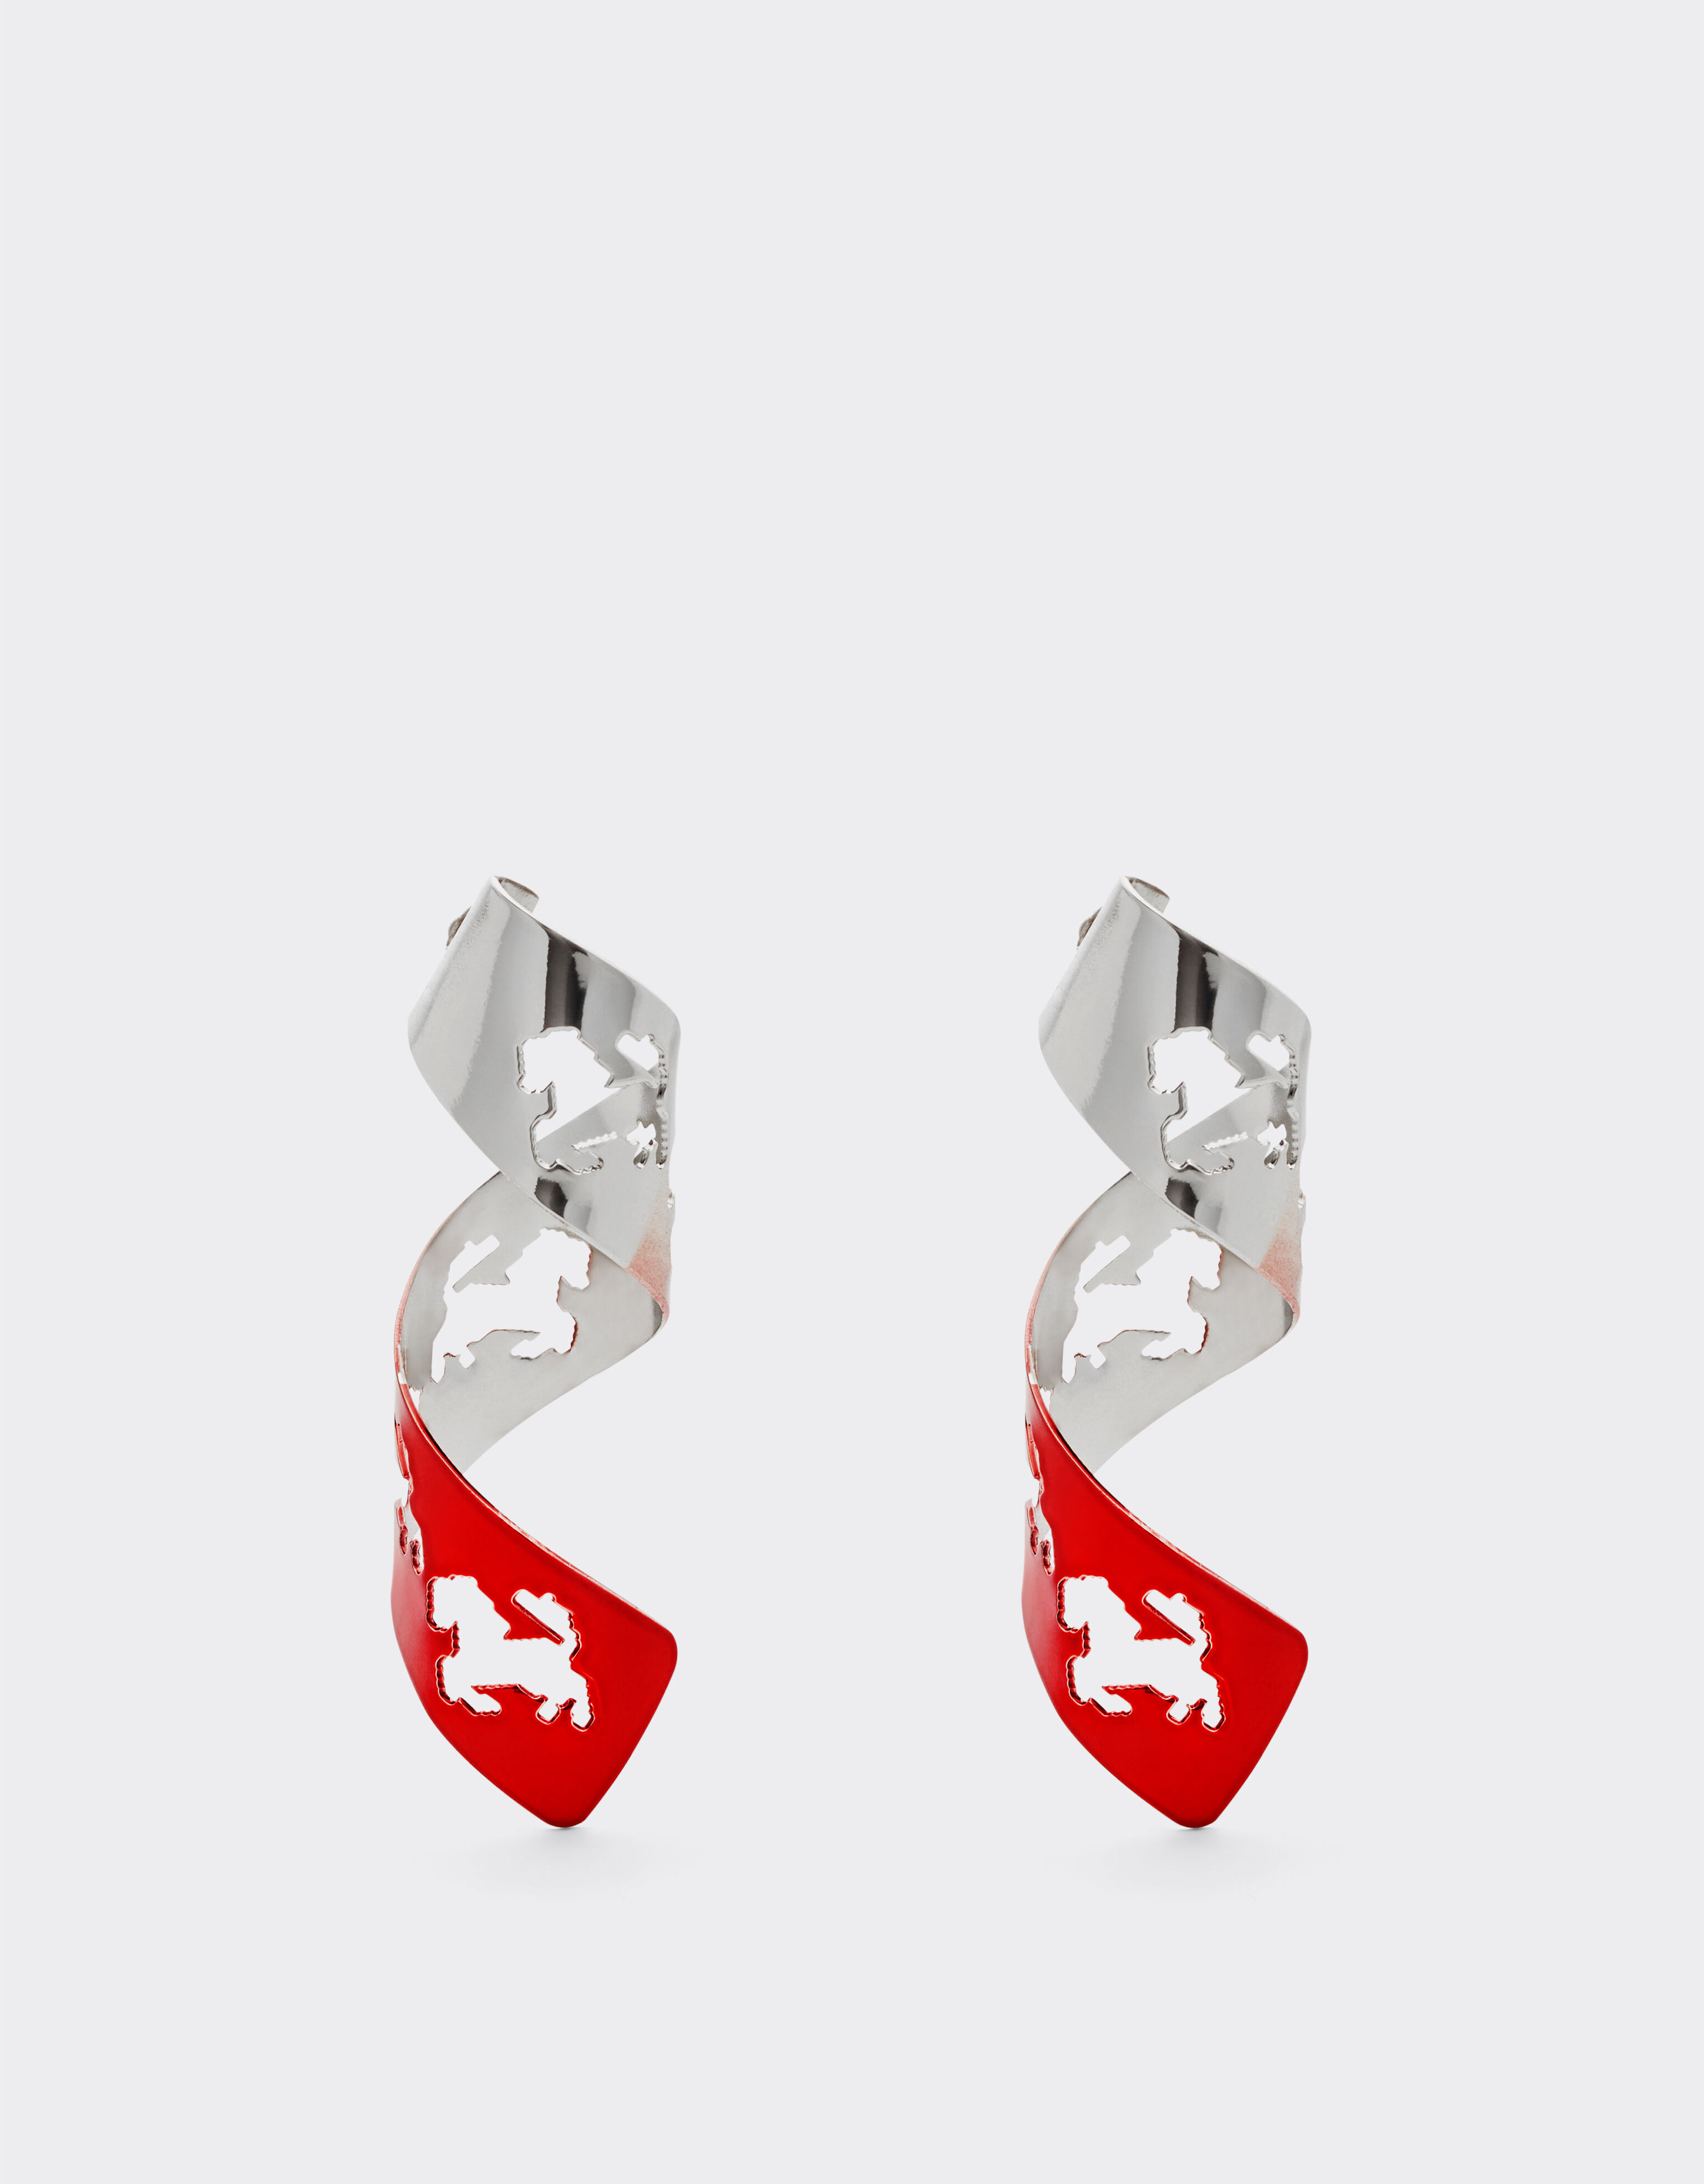 Ferrari Spiral earrings with Prancing Horse perforated pattern Rosso Dino 20132f